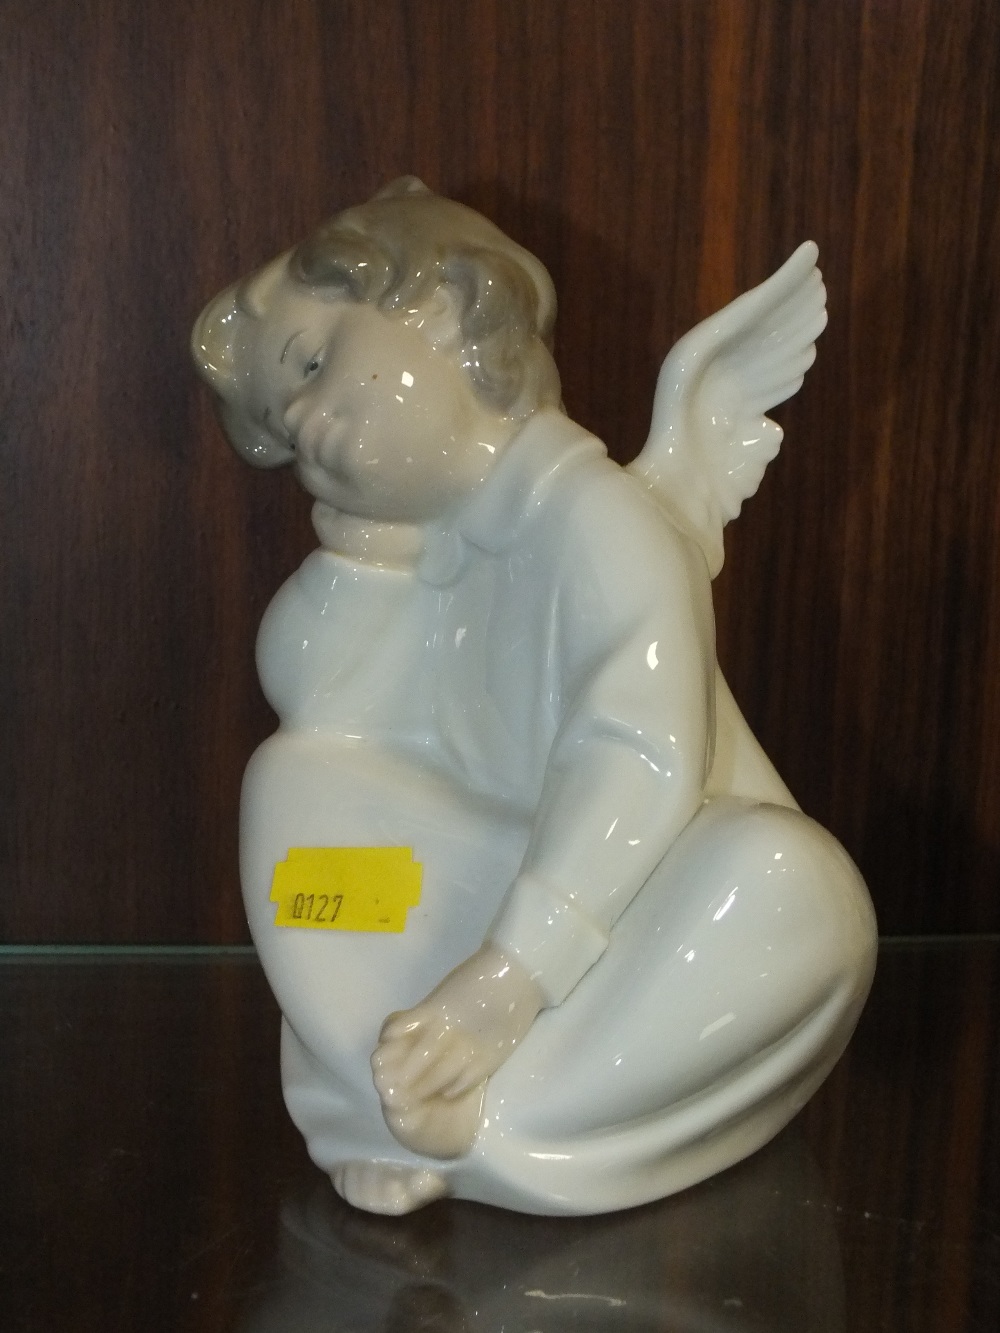 THREE LARGE LLADRO FIGURES COMPRISING OF A BOY WITH A CROSS, A SEATED CHERUB AND A SEATED LADY - Image 4 of 4